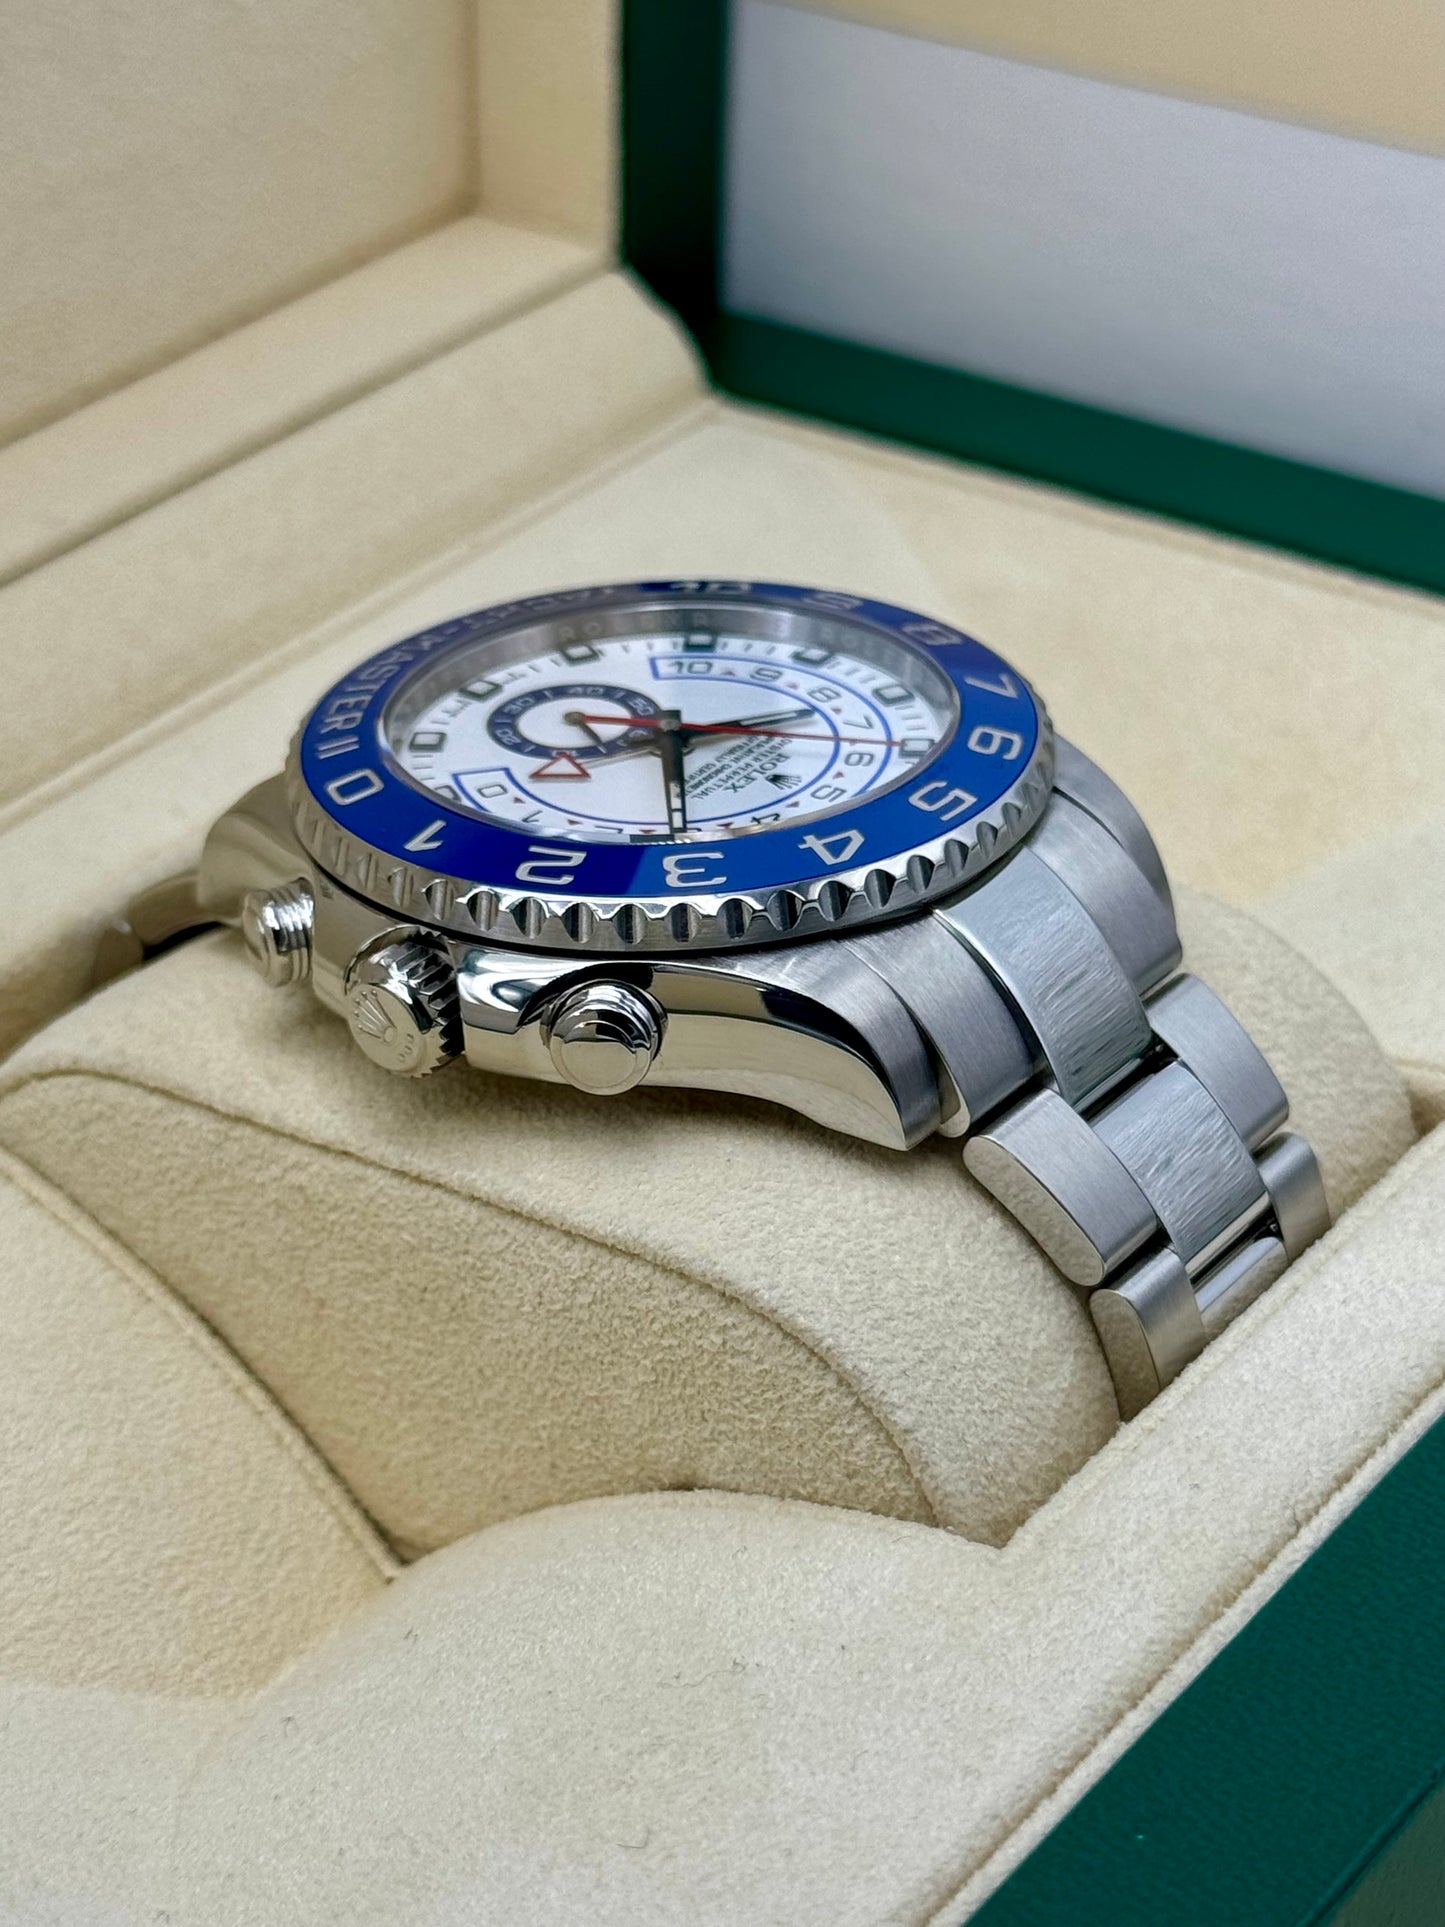 2013 Rolex Yacht-Master II 44mm 116680 Stainless Steel White Dial - MyWatchLLC